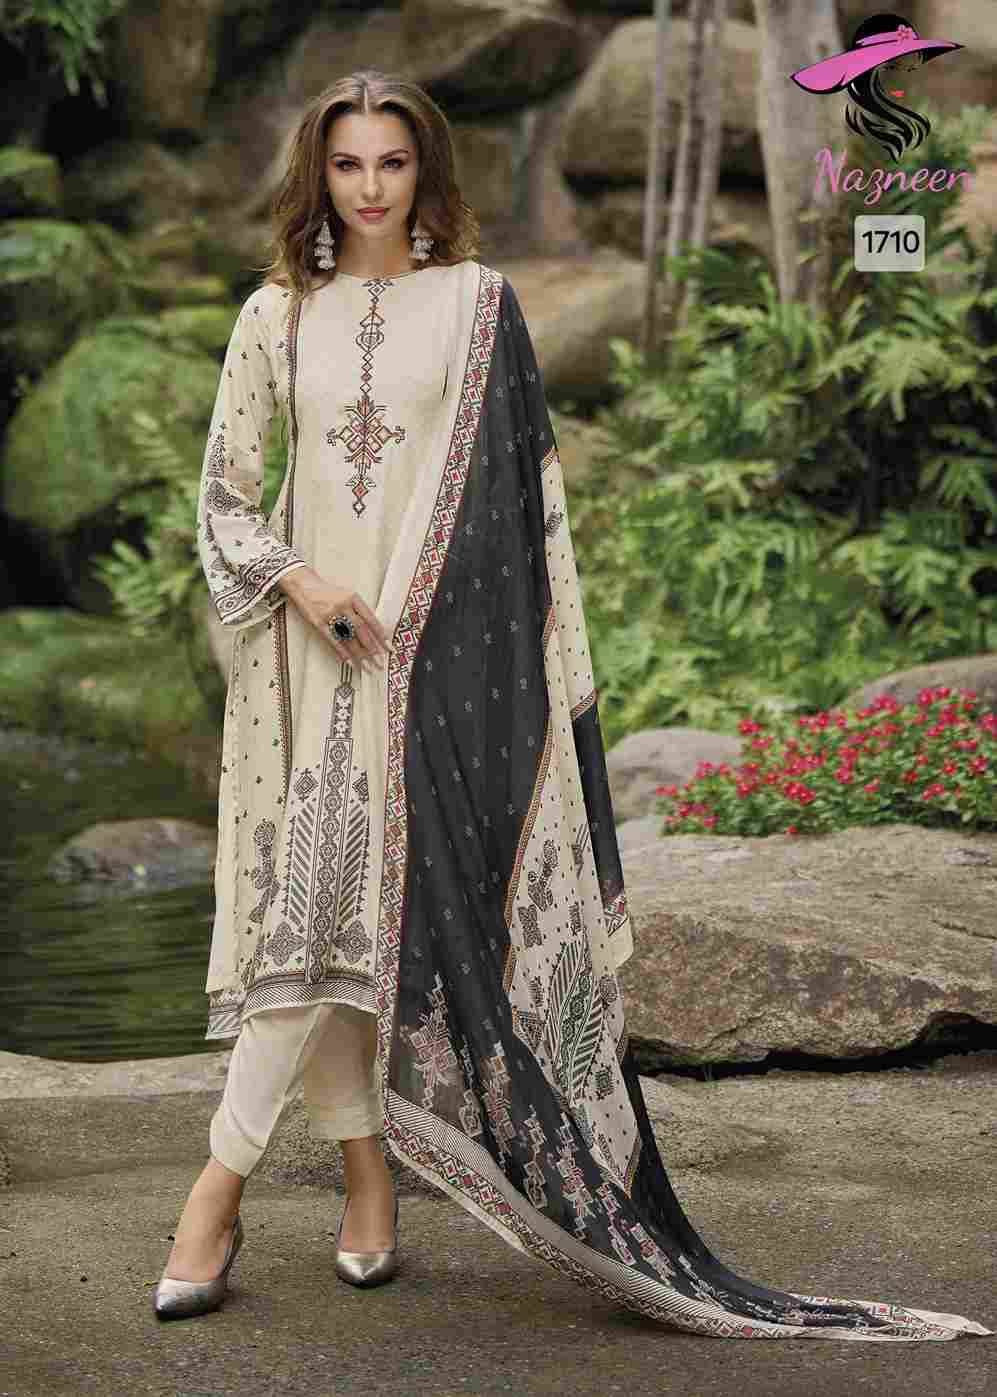 Minali By Nazneen 1706 To 1711 Series Beautiful Festive Suits Stylish Fancy Colorful Casual Wear & Ethnic Wear Pure Viscose Muslin Print Dresses At Wholesale Price